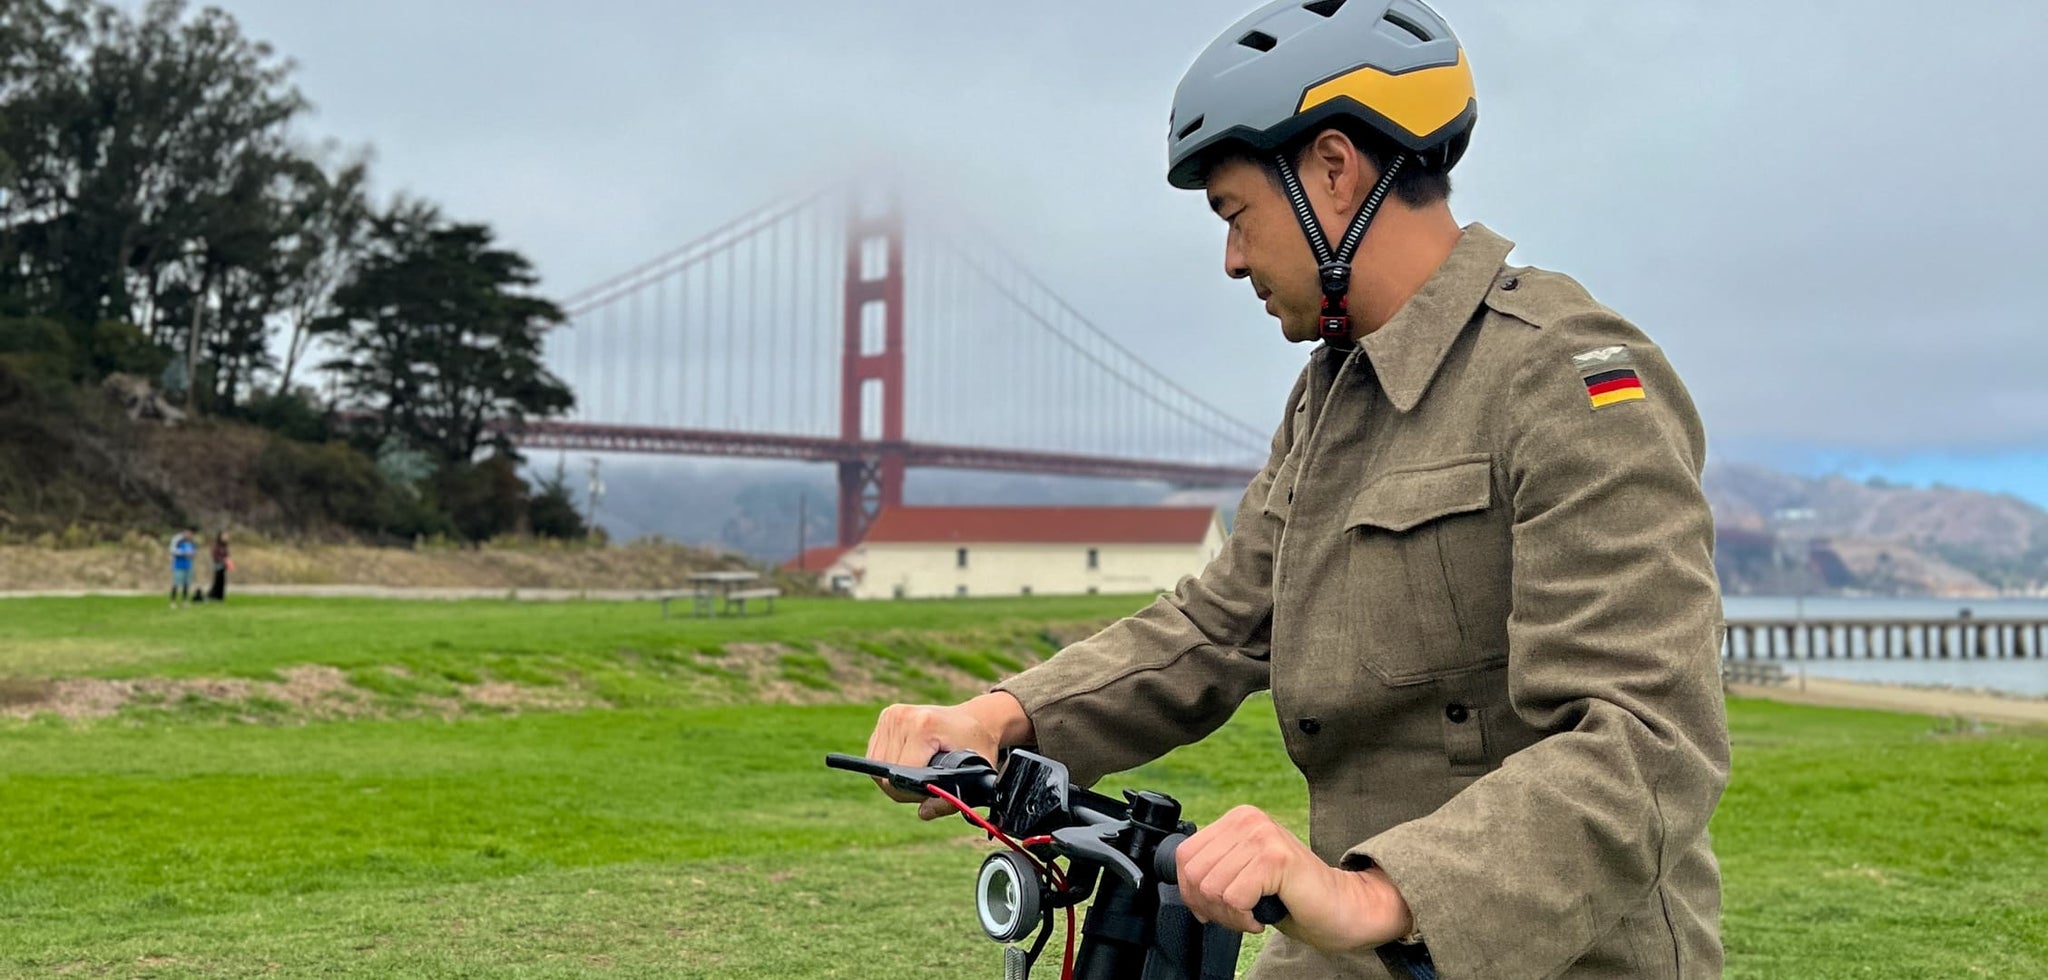 San Francisco's New E-Bike and Scooter Battery Regulations for Enhanced Safety